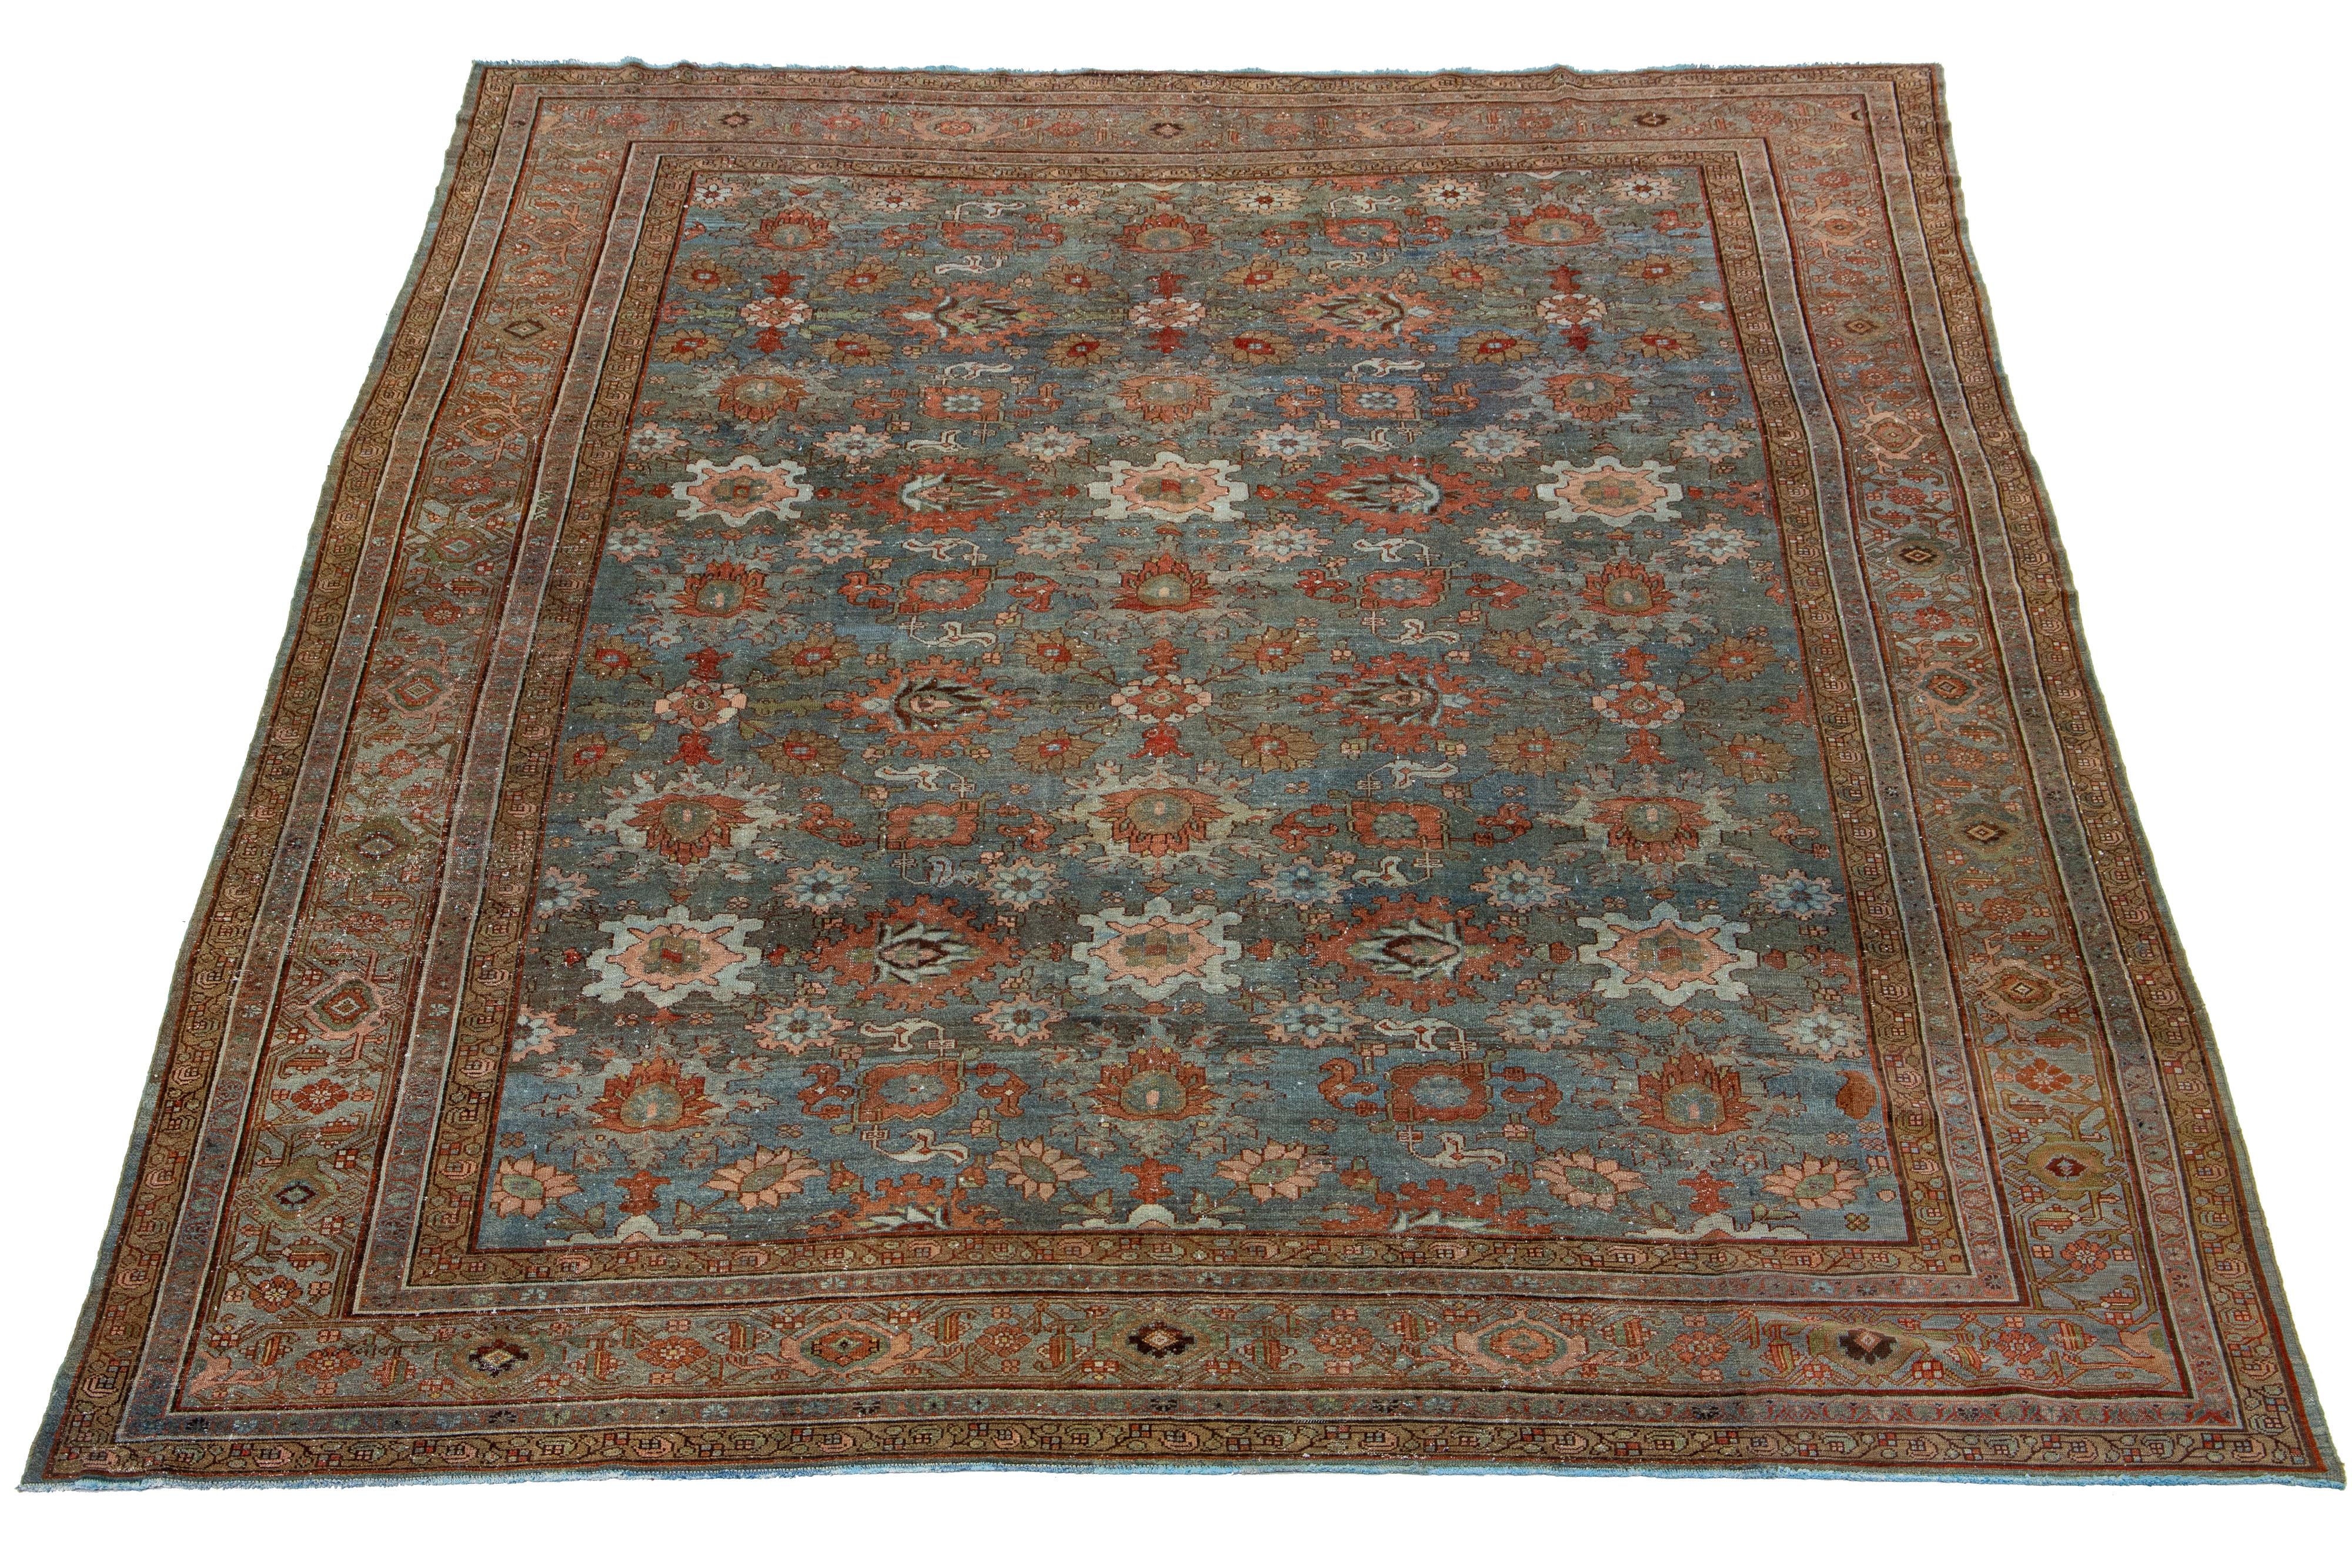 Beautiful antique Malayer hand-knotted wool rug with a blue color field. This Persian rug has a gorgeous all-over design with rust and brown accents.

This rug measures 11' X 14'.

.